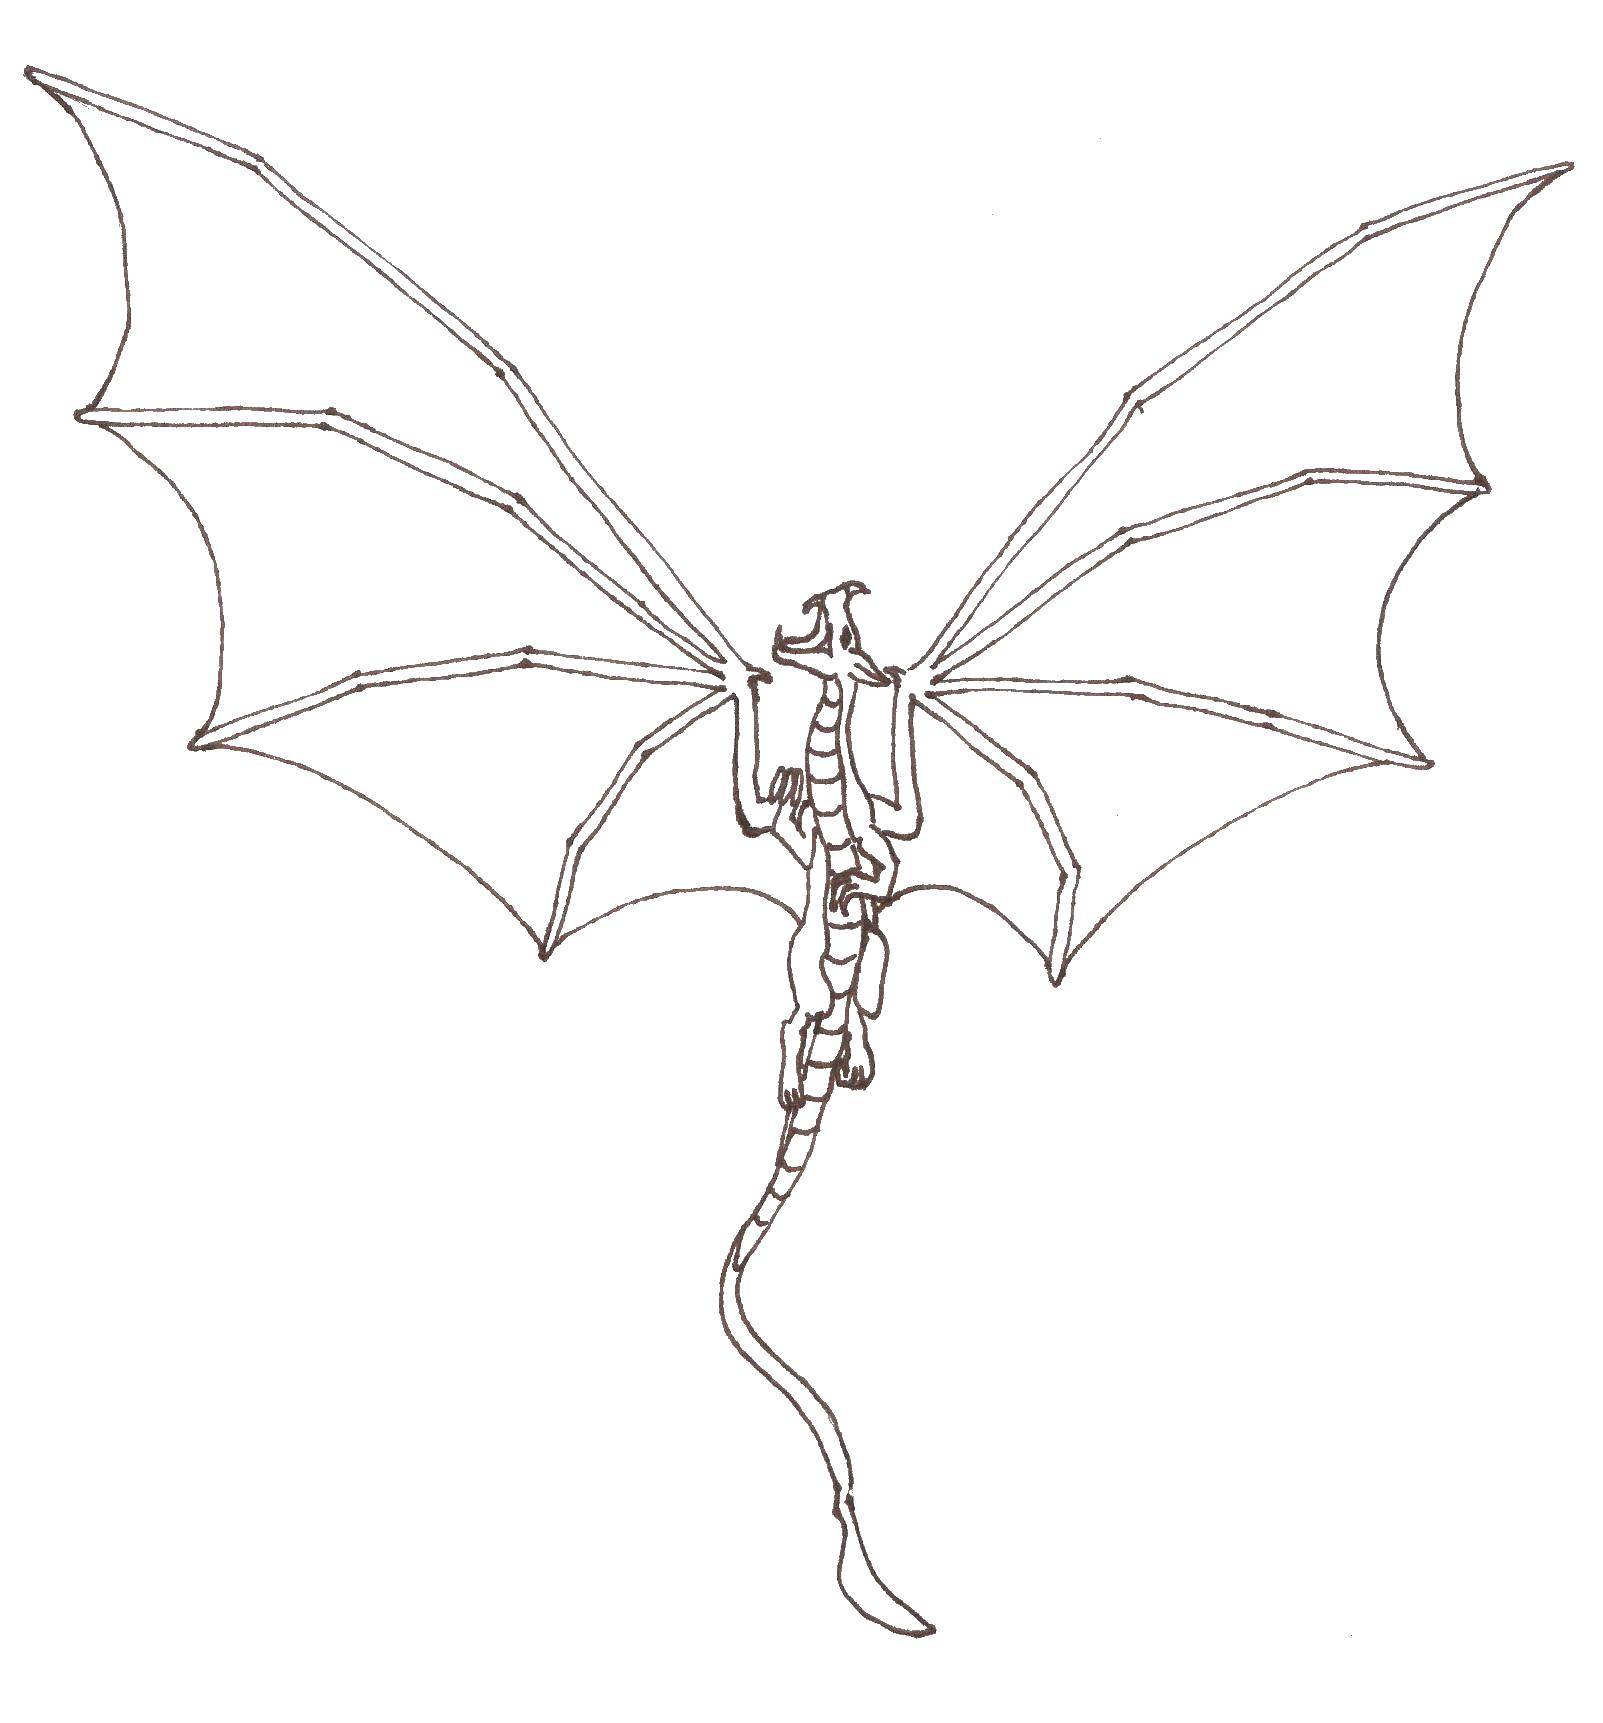 Coloring Dragon with wings. Category coloring. Tags:  wings, dragon.